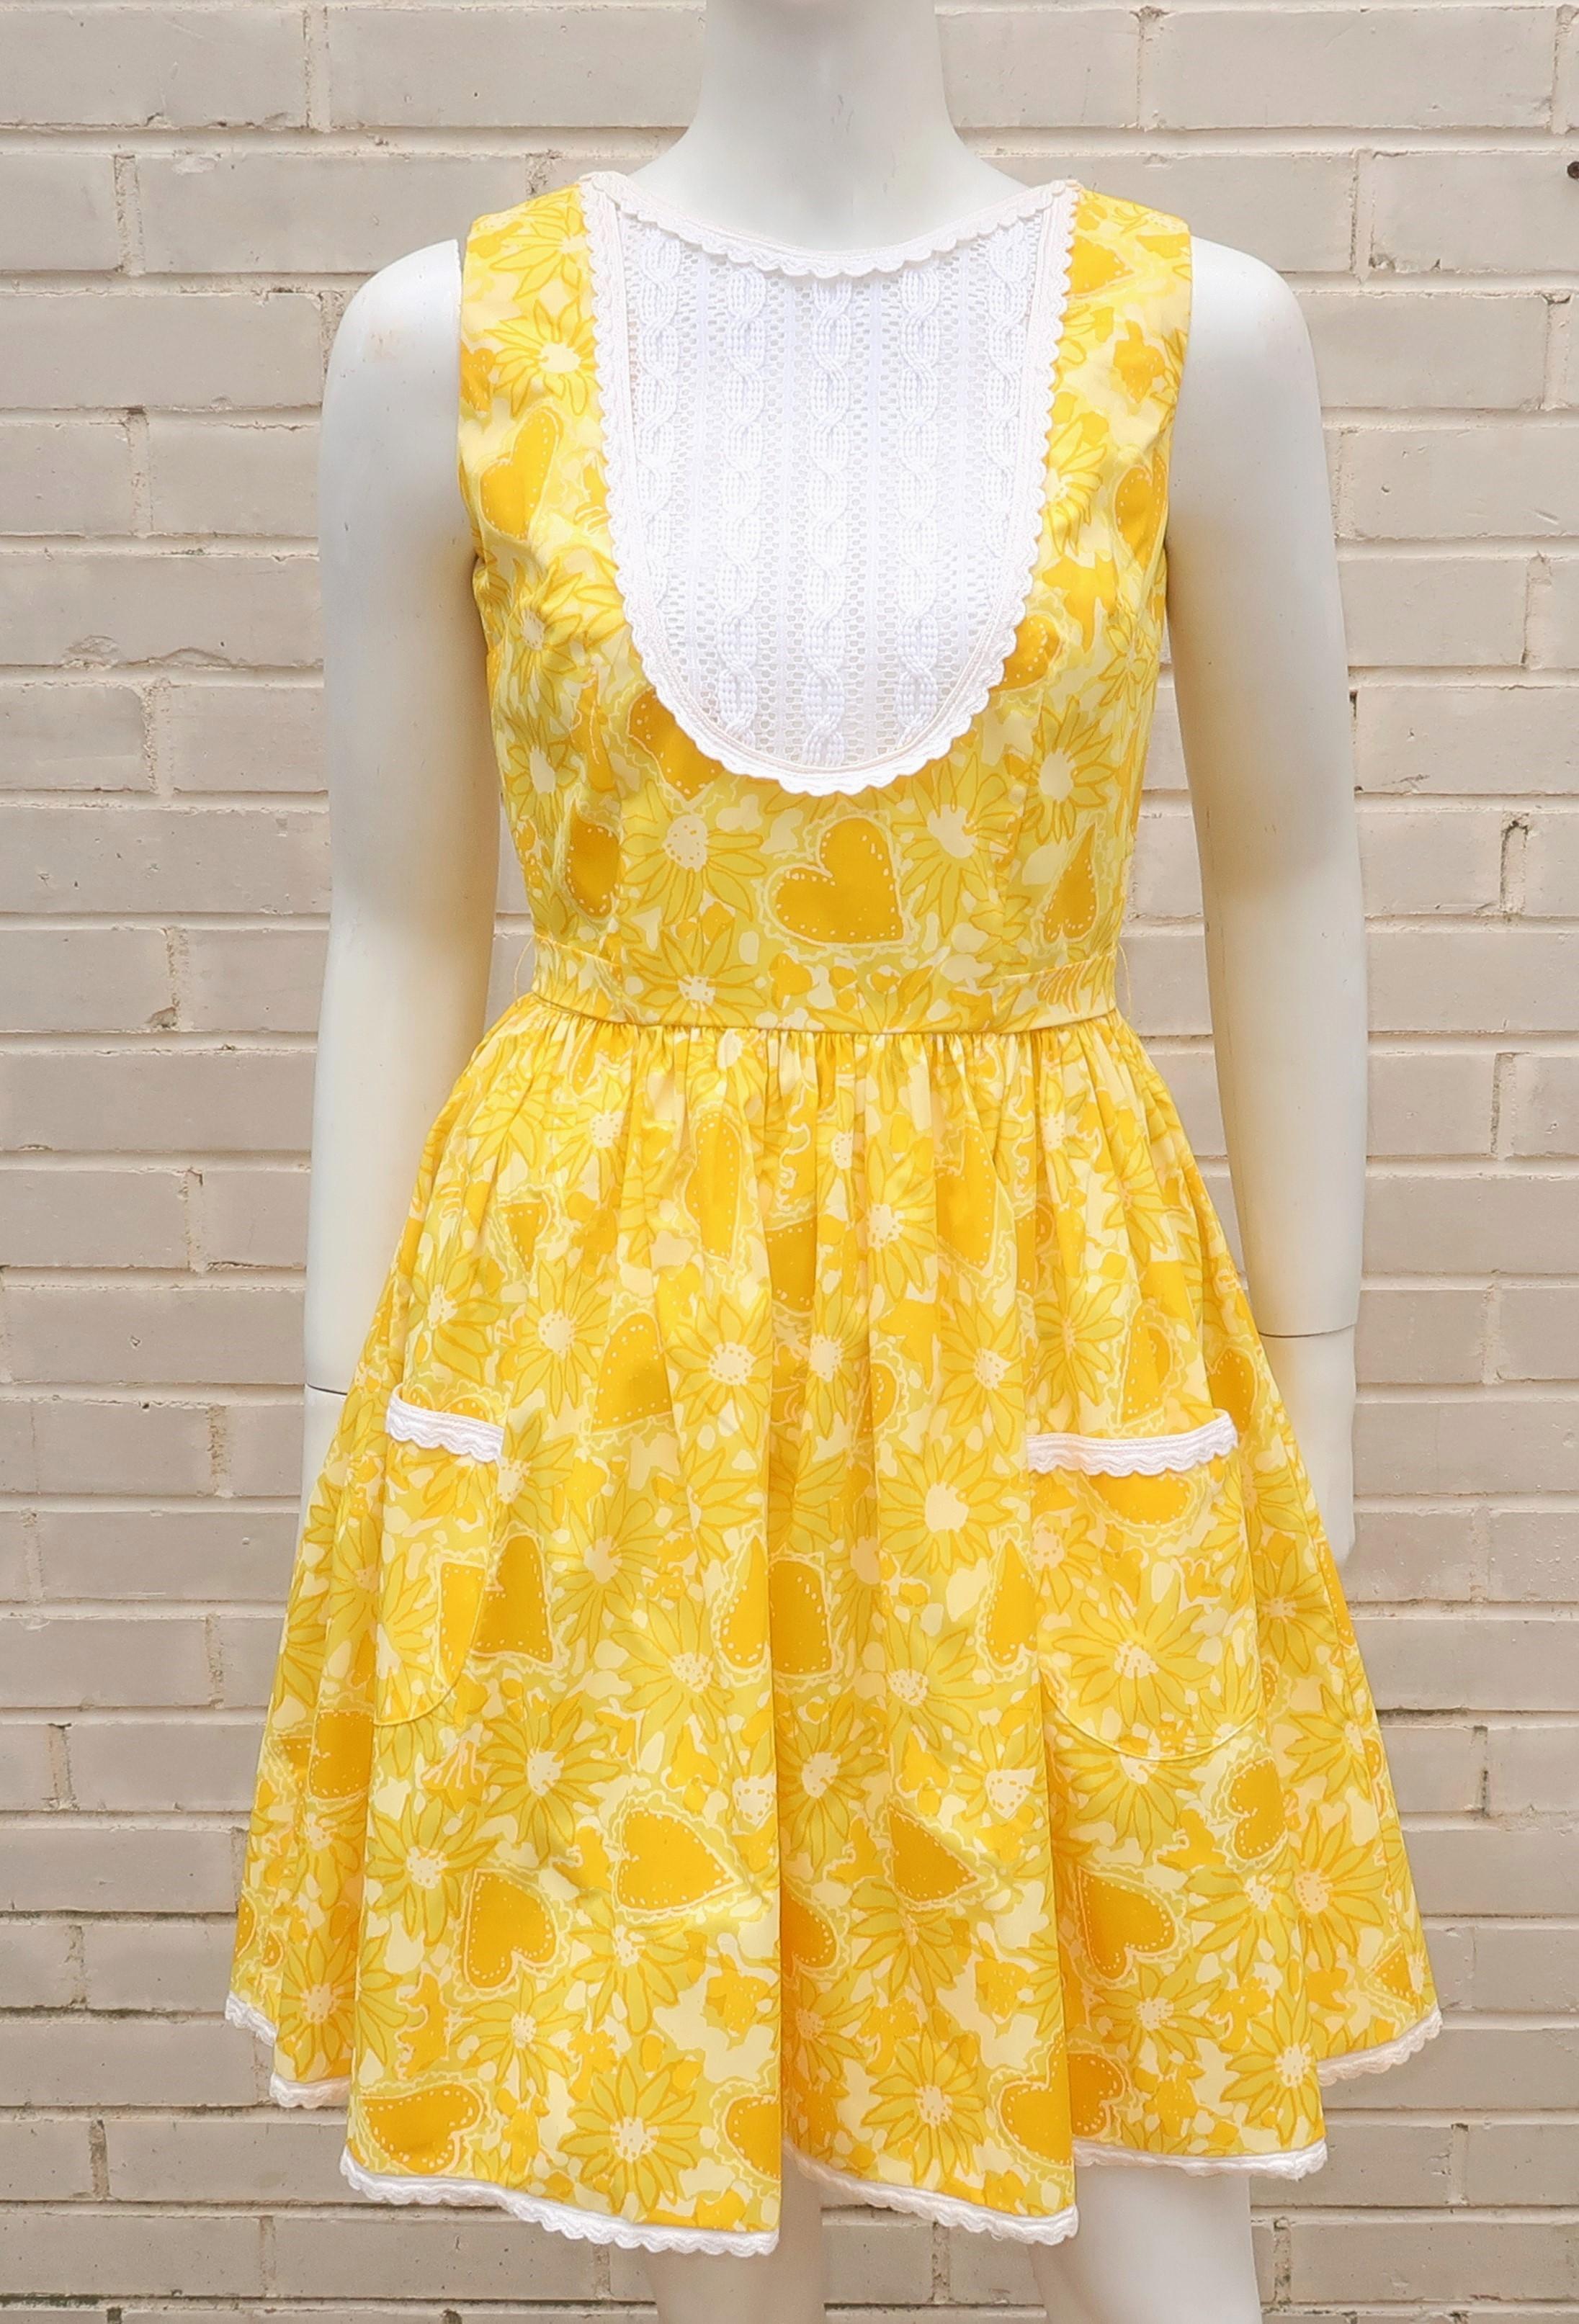 1960's Lilly Pulitzer yellow sundress with a 'flower power' daisy and heart print in a cotton blend.  The dress zips and hooks at the scoop back with a built-in tie at the waist.  It is a flirty look for Pulitzer's otherwise preppy designs mostly